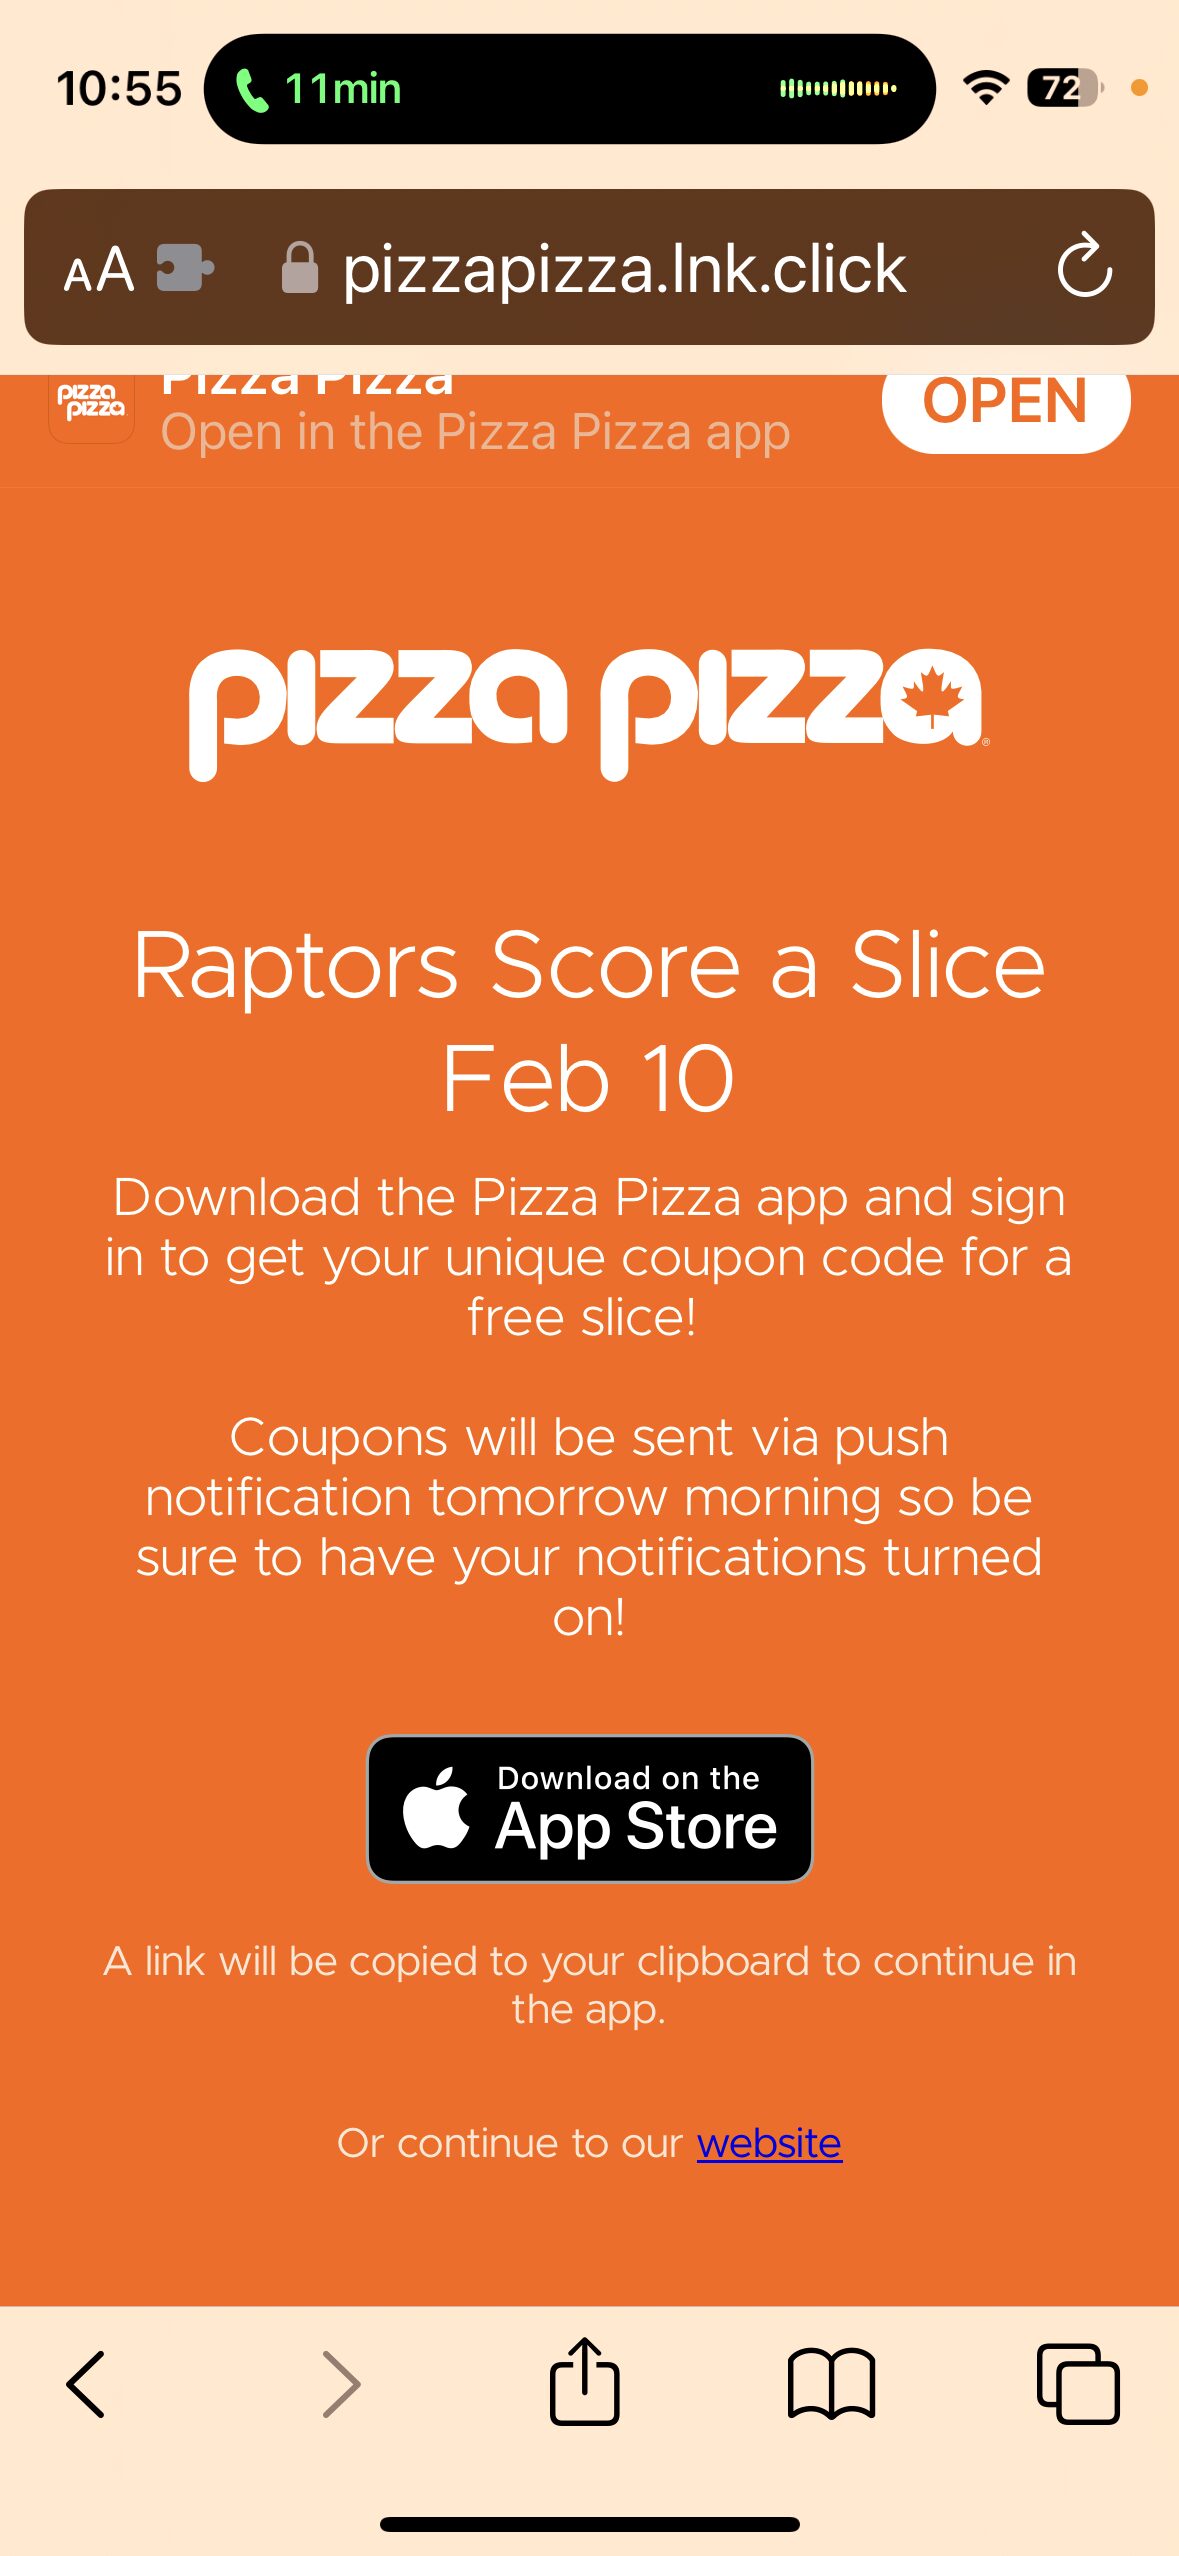 Pizza Pizza] Free slice from Raptors Game? - RedFlagDeals.com Forums